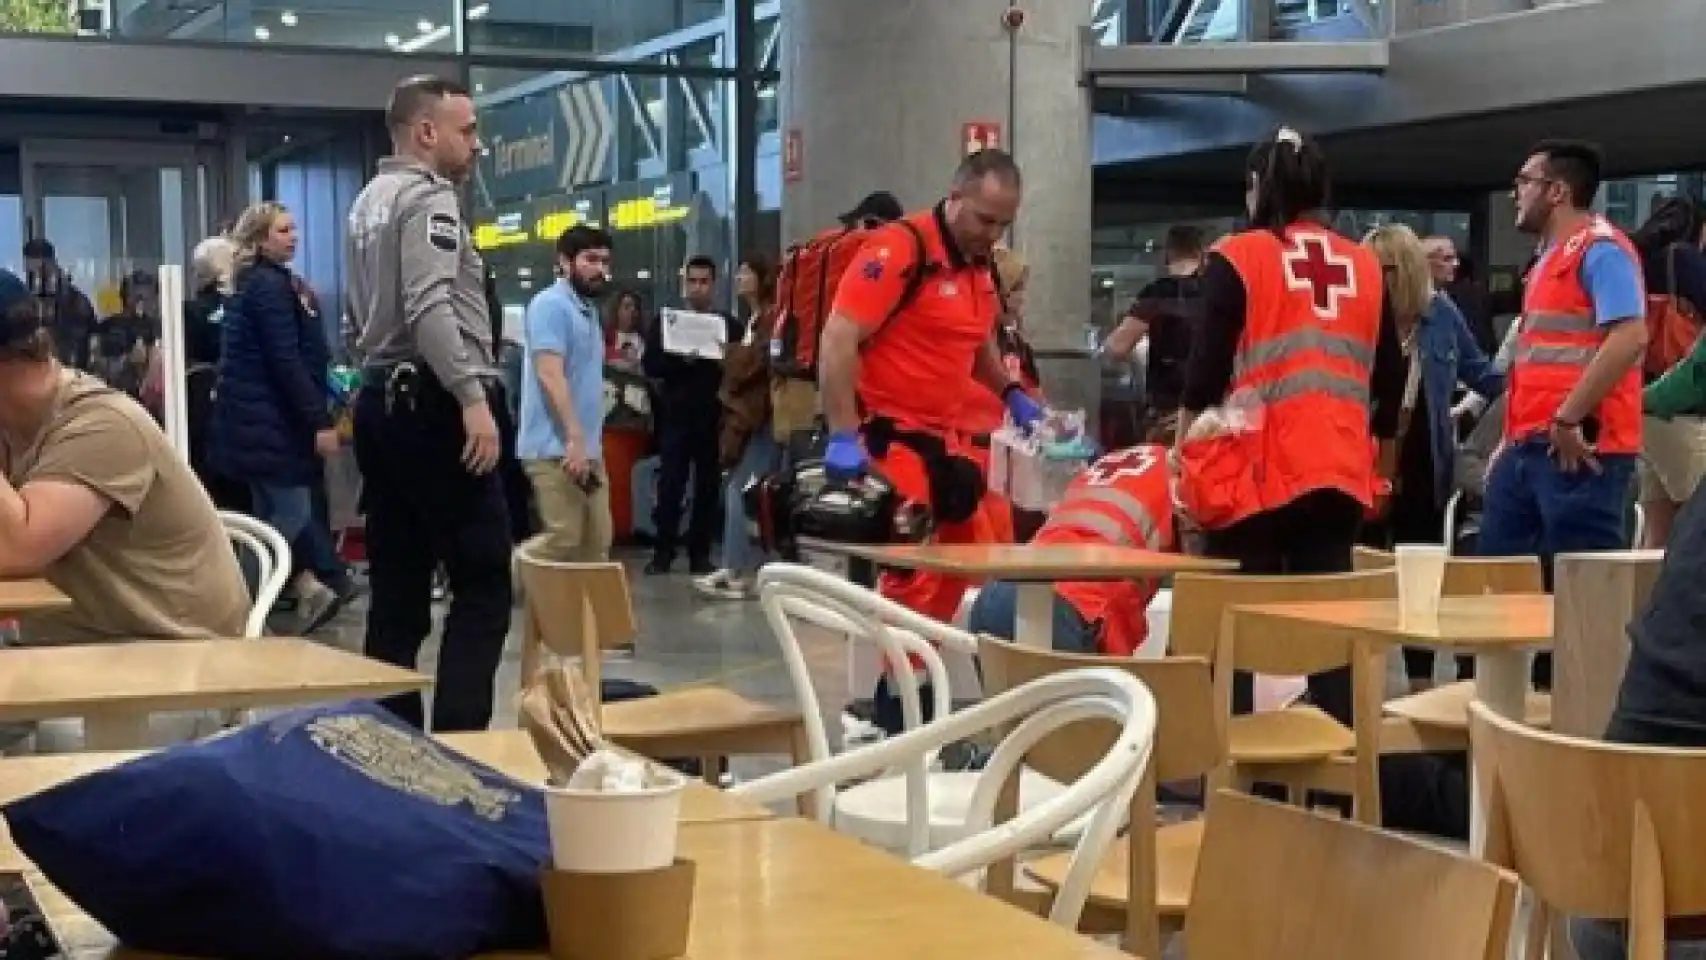 Tourist drops dead at Malaga Airport: 64-year-old suffers heart attack in the arrivals area